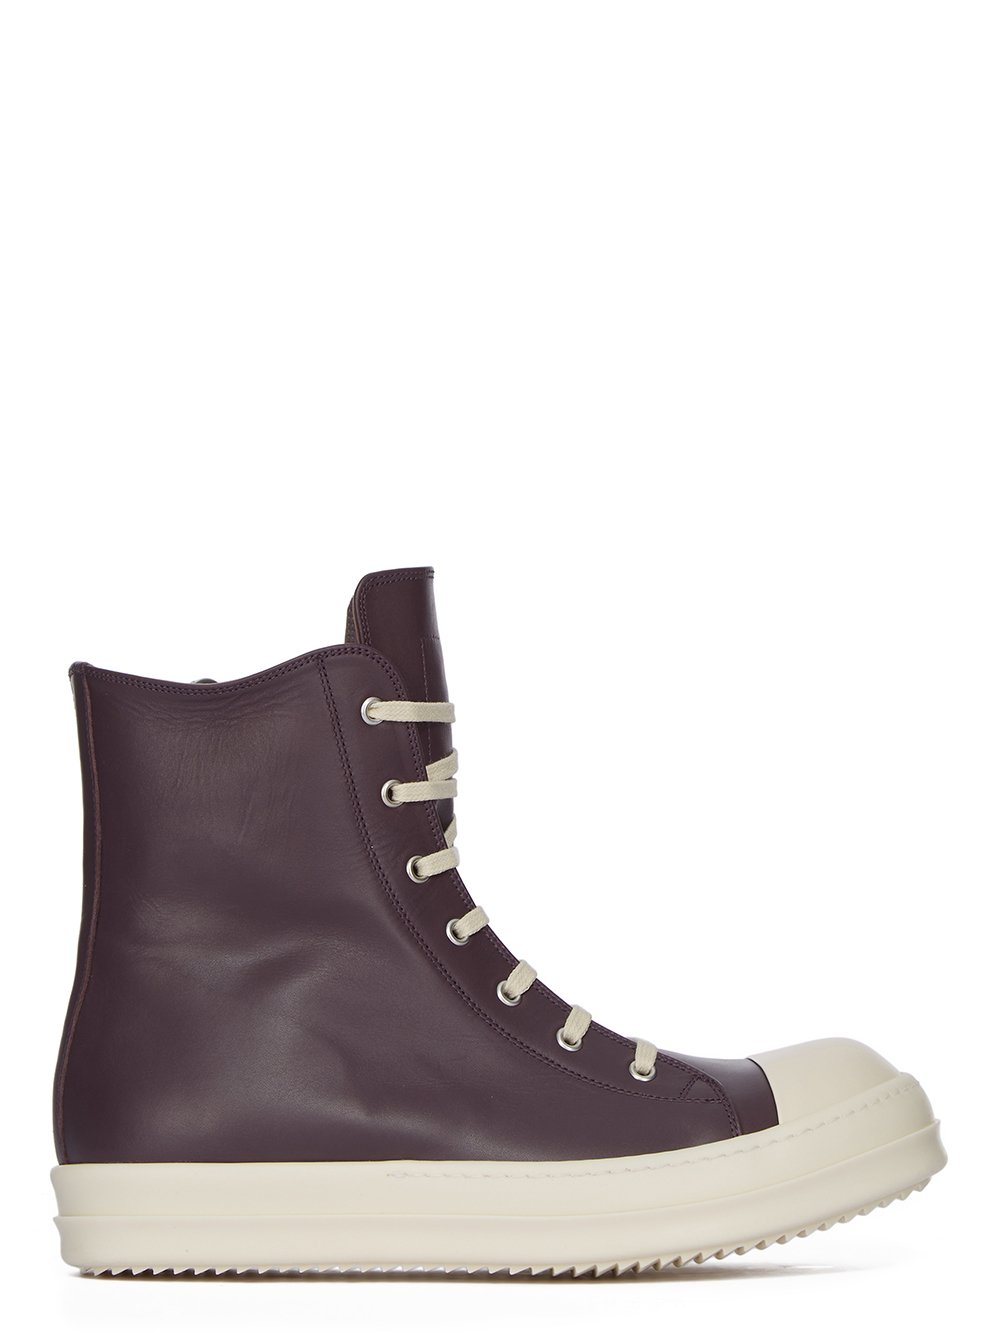 RICK OWENS FW23 LUXOR SNEAKERS IN AMETHYST AND MILK CORTINA GREASE CALF LEATHER